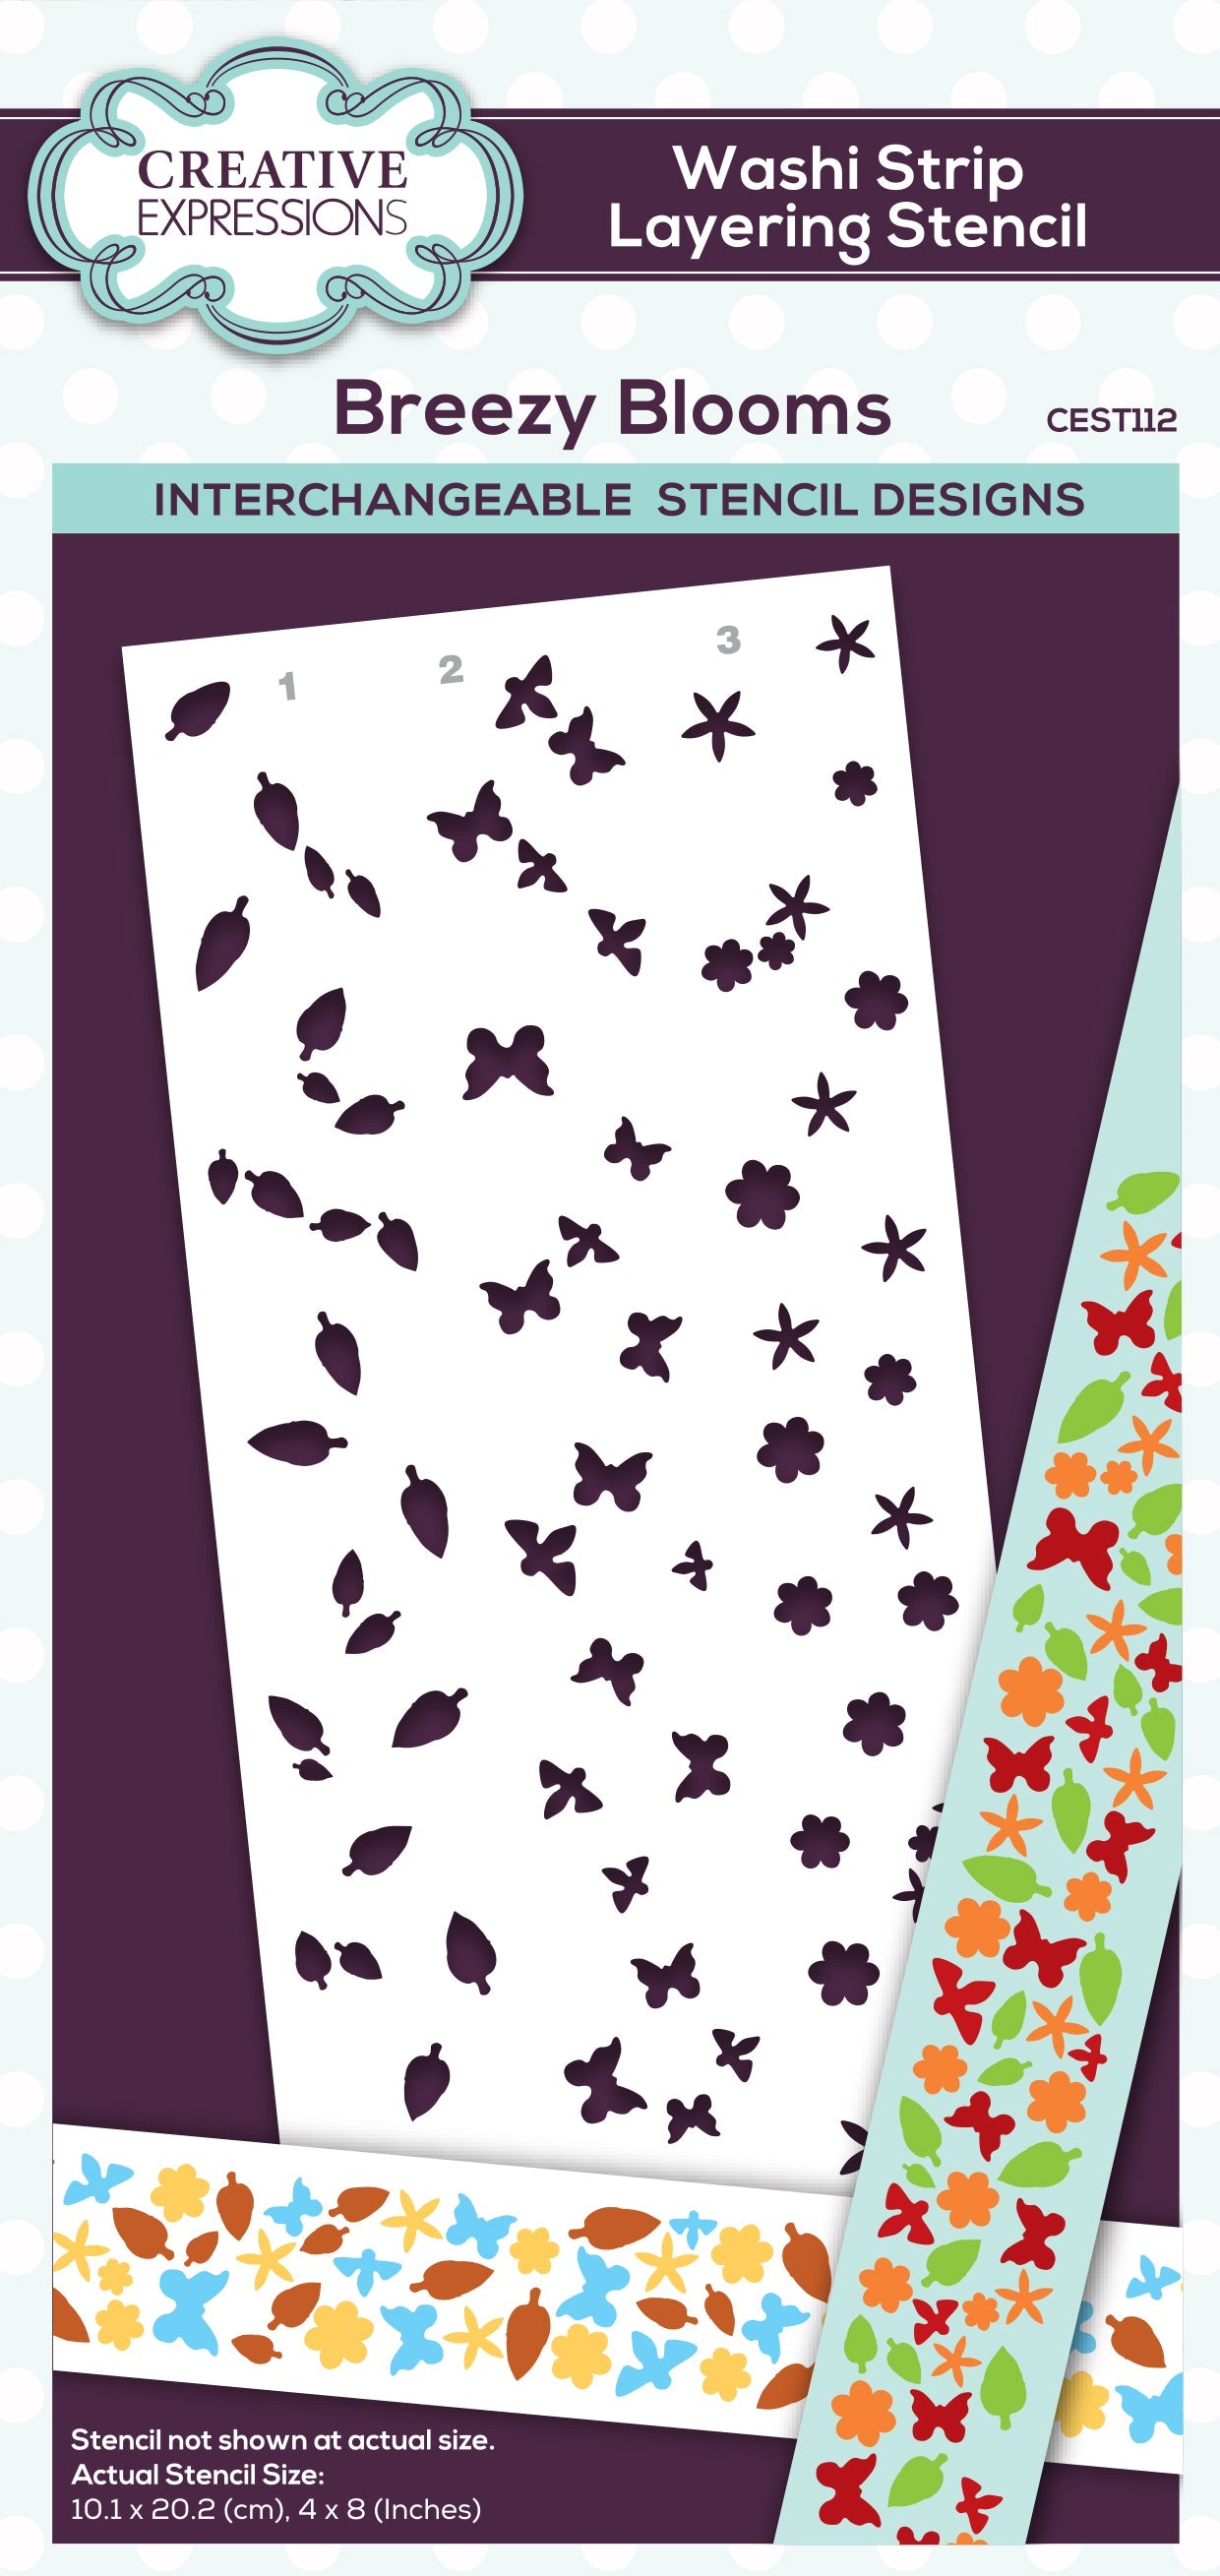 Creative Expressions Breezy Blooms Washi Strip Layering Stencil